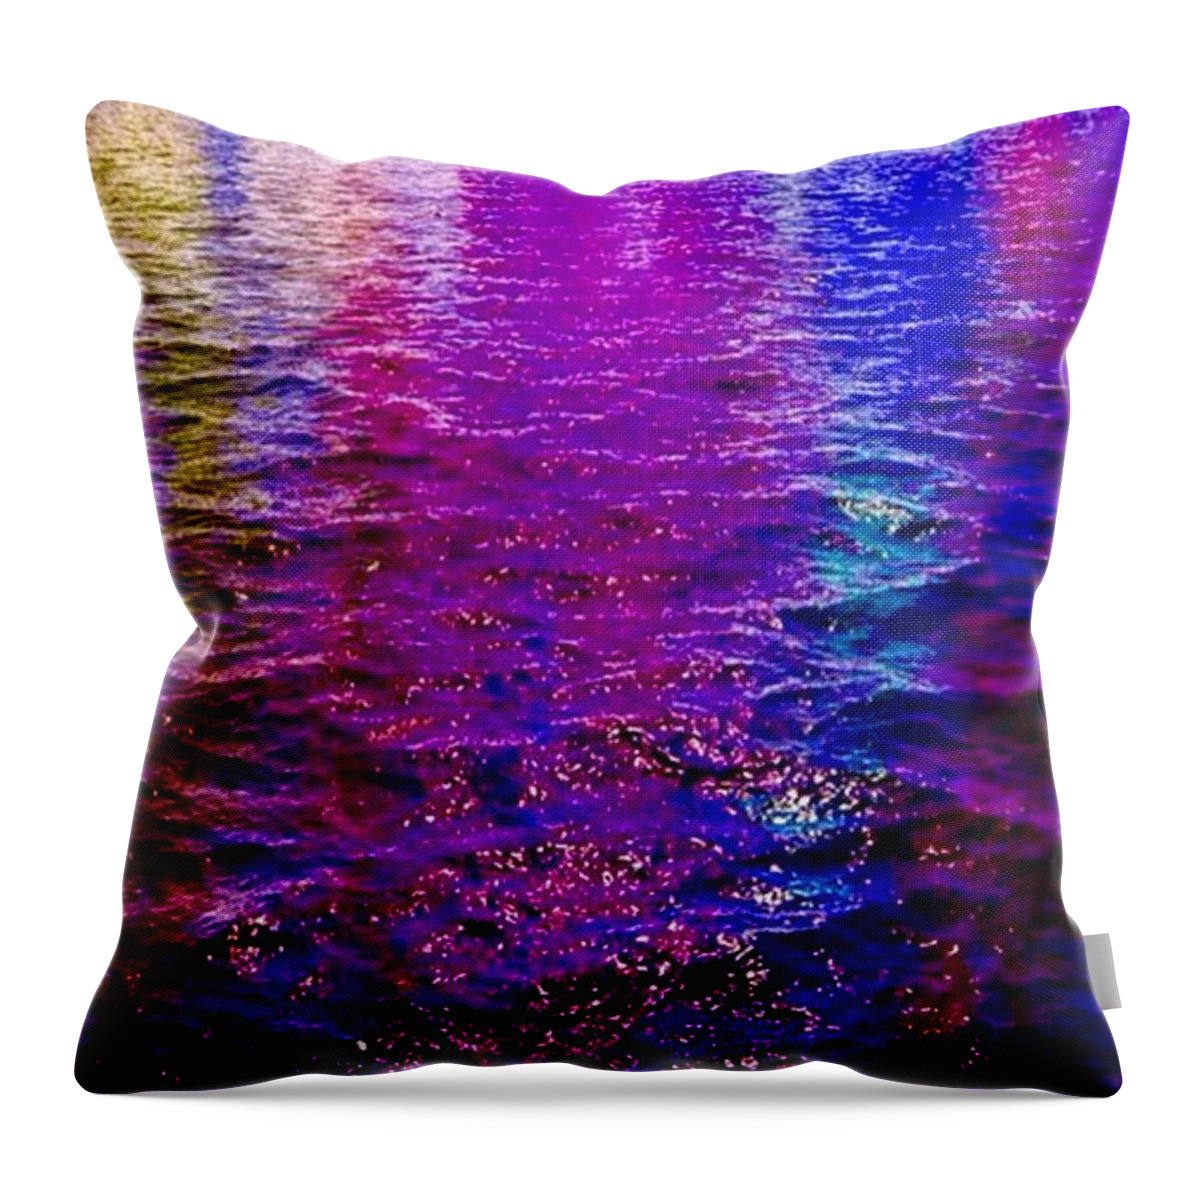 Reflections Throw Pillow featuring the painting Reflections by Mark Taylor